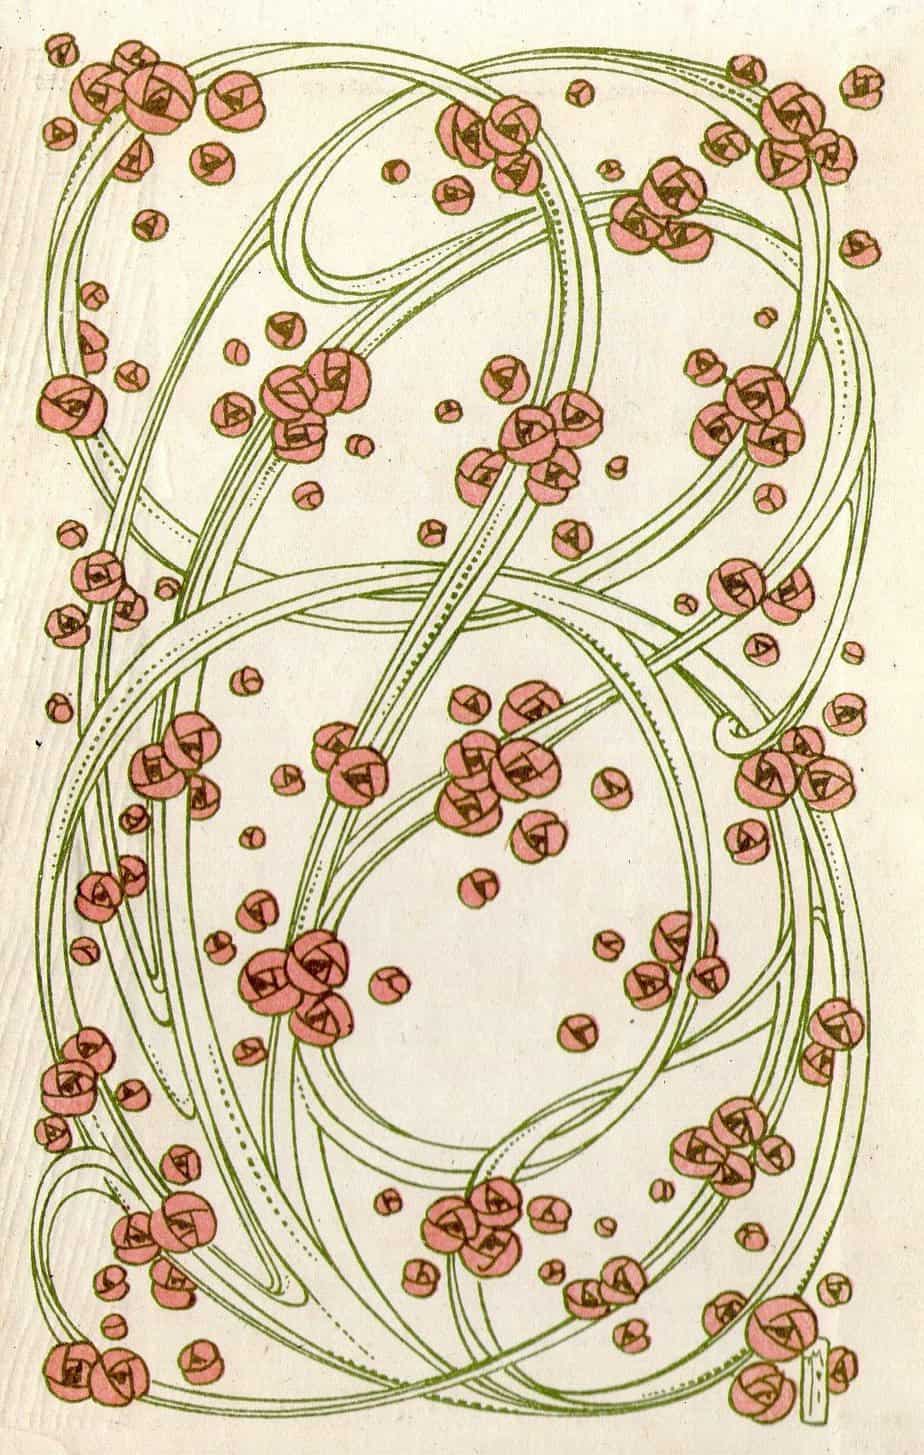 Superb Art Nouveau Design Endpapers c1905 by Talwin Morris - Friend and Contemporary of Charles Rennie Mackintosh